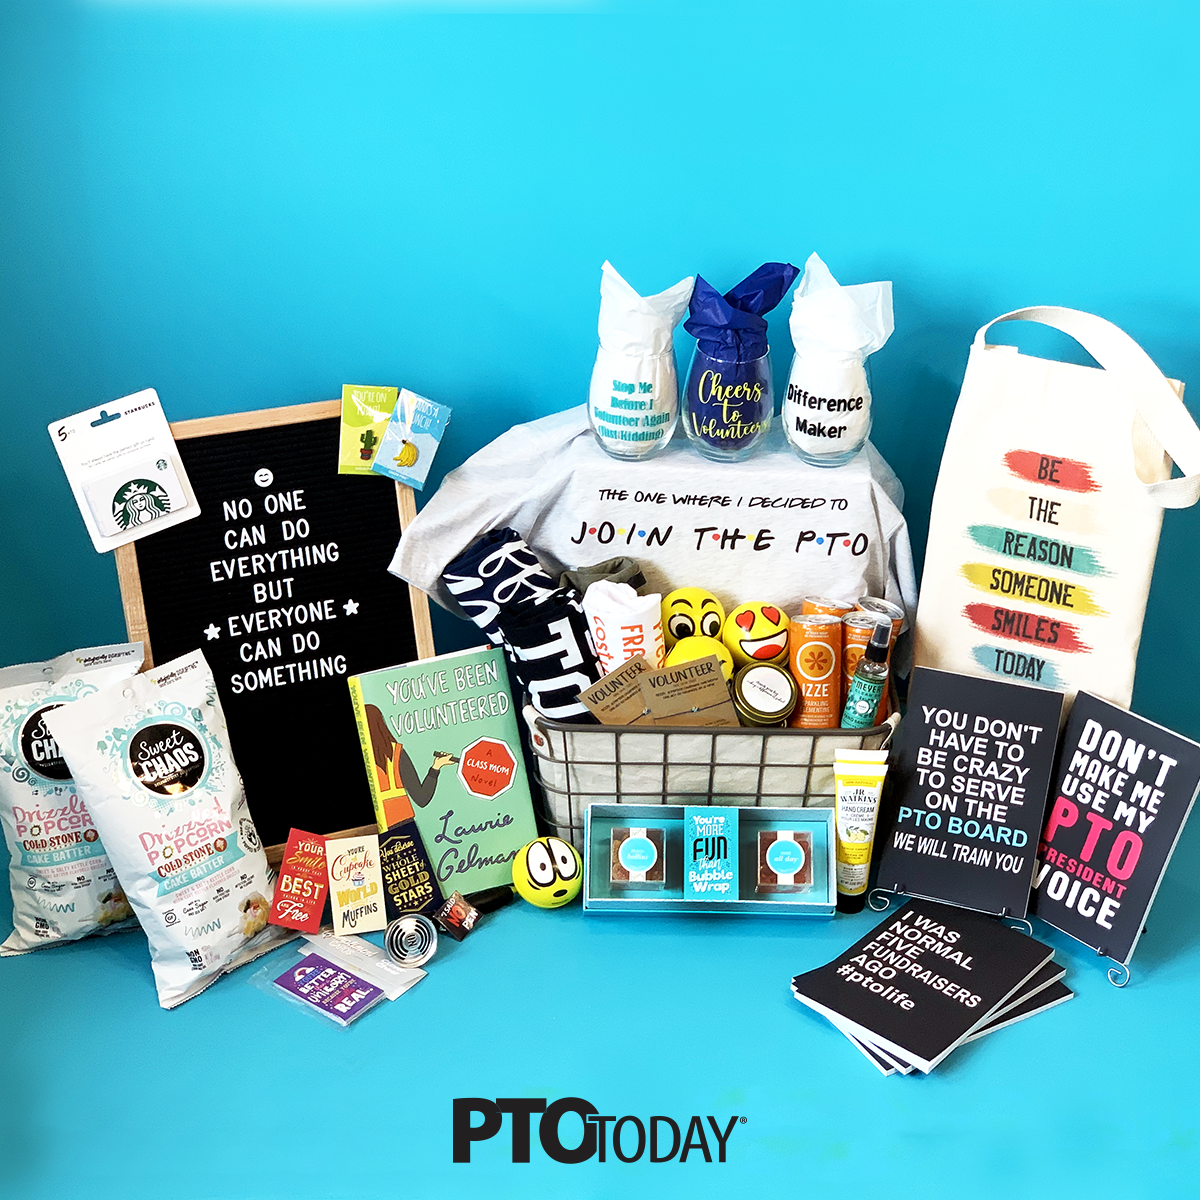 Update your officer info for a chance to win a new crew thank-you gift basket